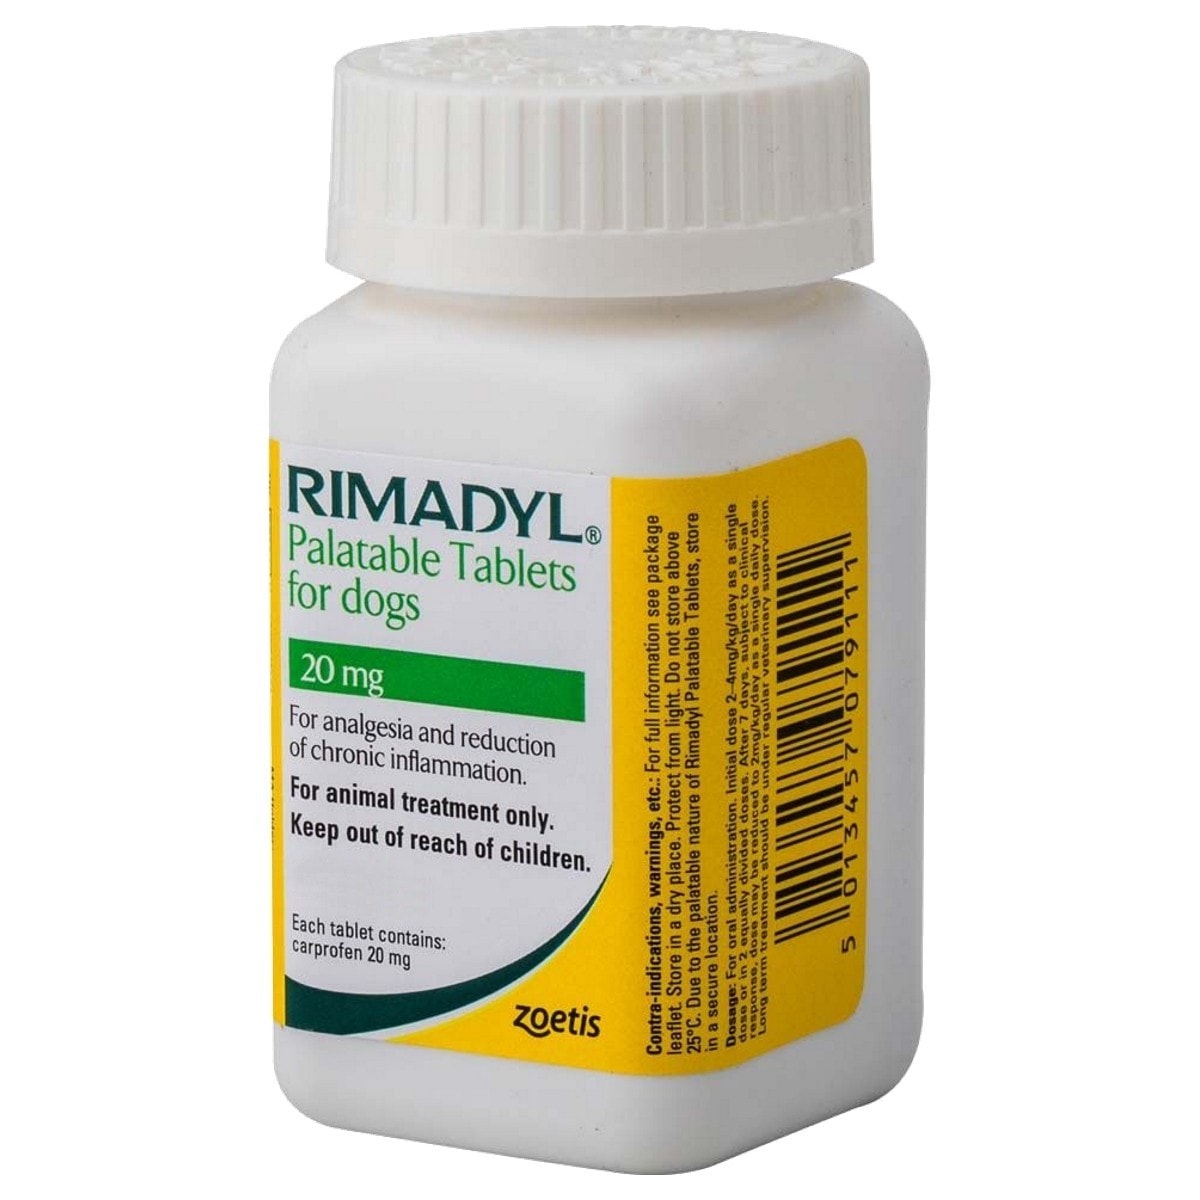 rimadyl-20mg-100-palatable-tablets-vets-2-your-pets